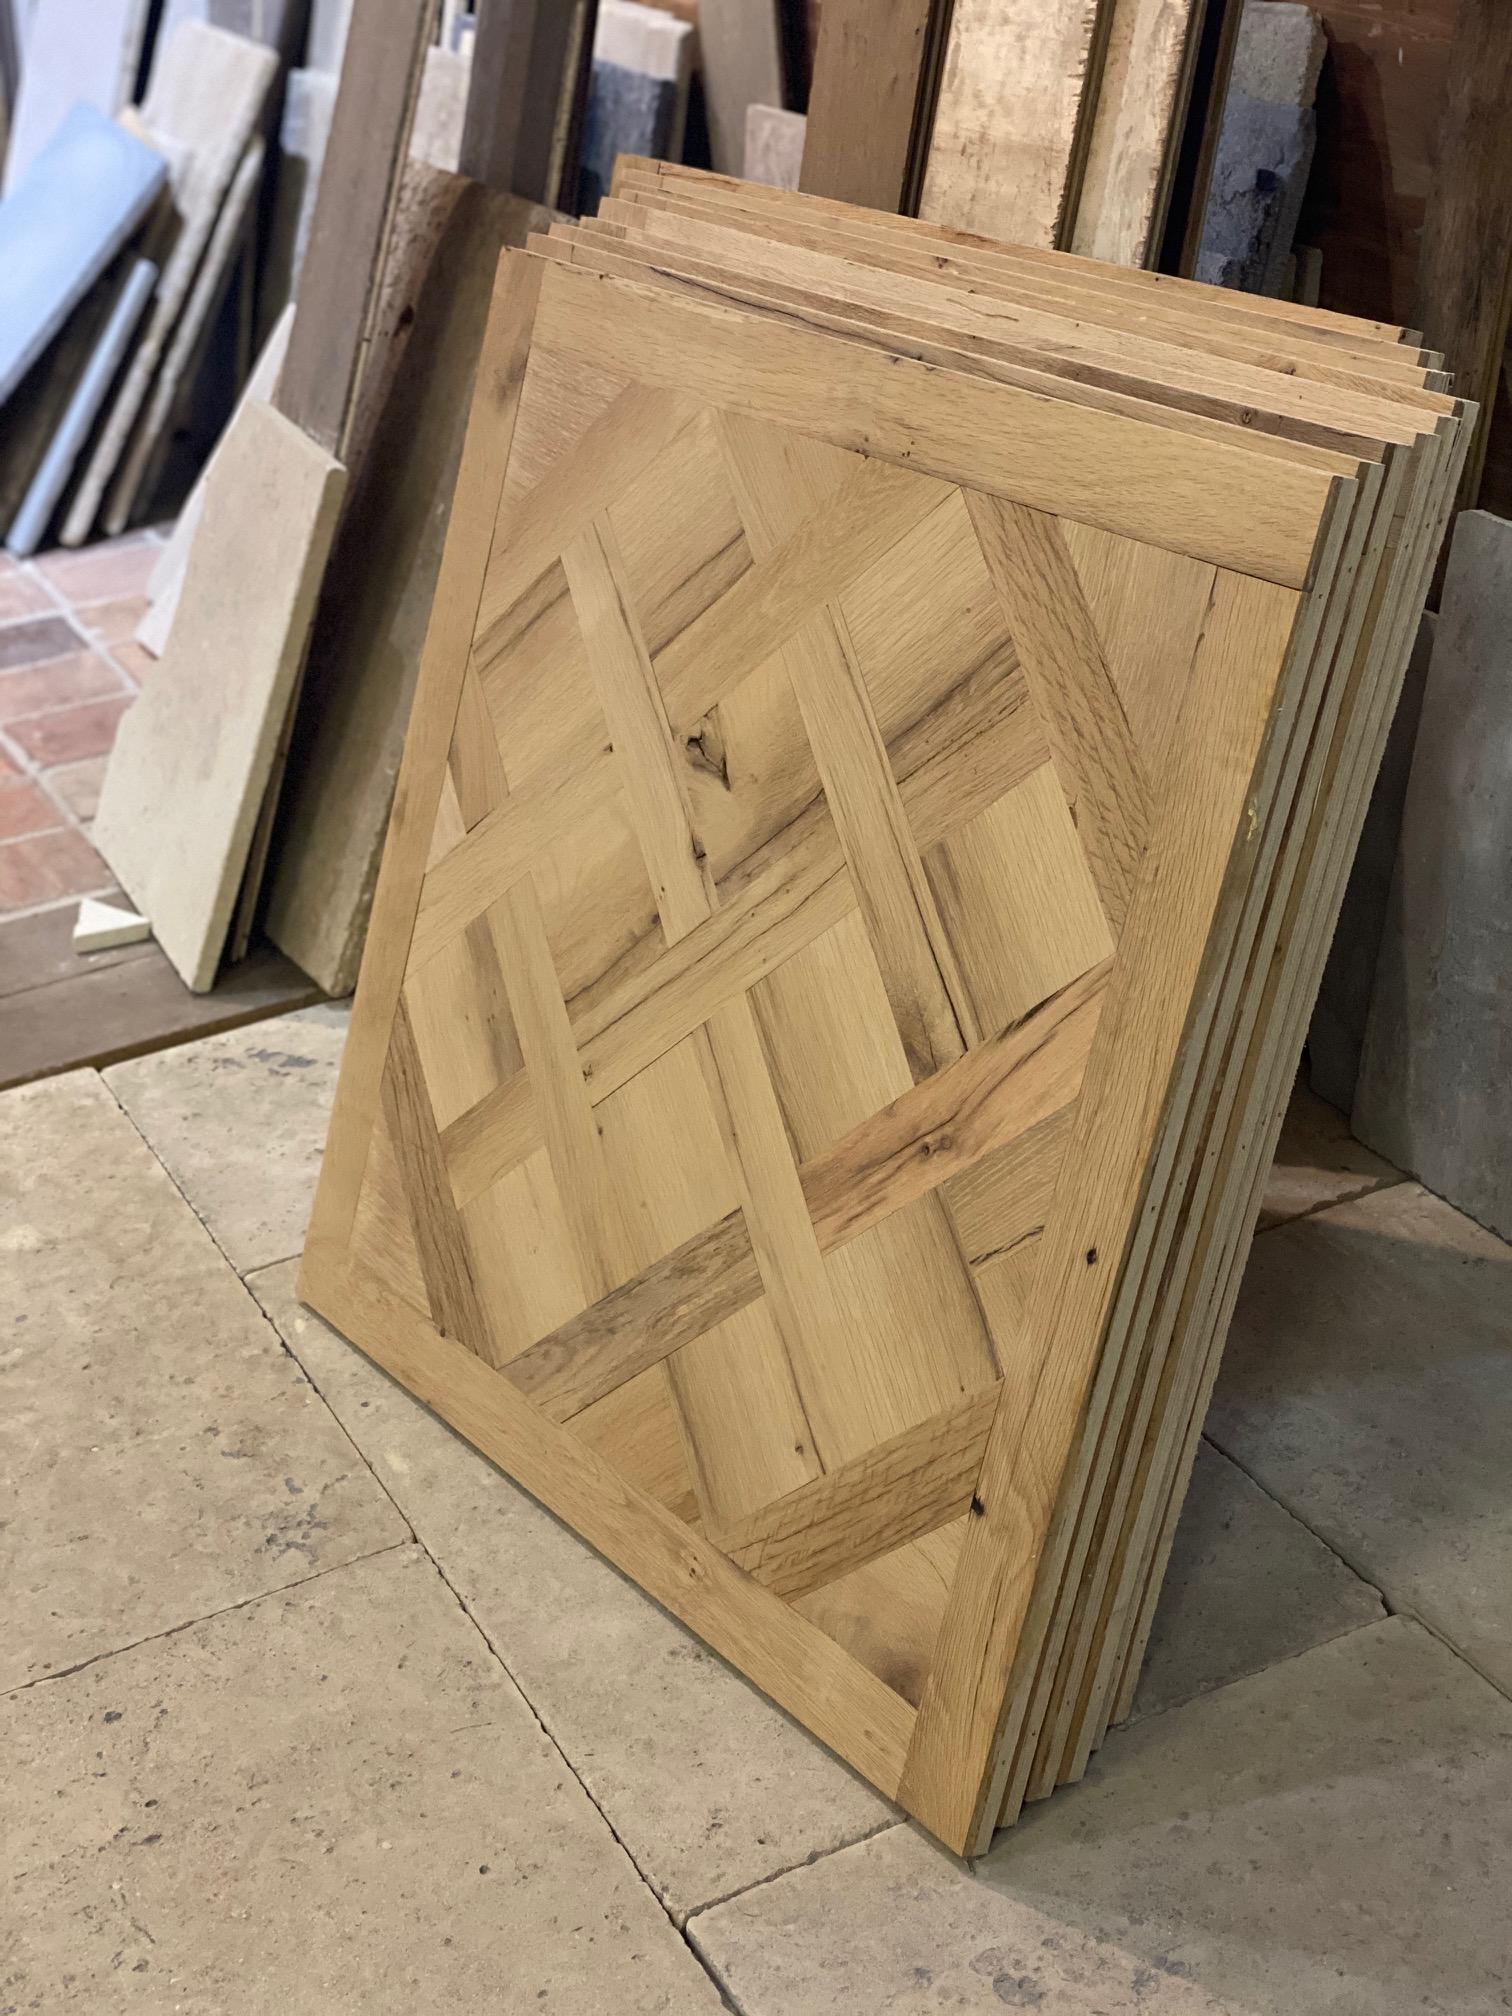 Antique oak flooring in a versailles pattern, the oak dates back to the 1800s. 

Each 1-meter square is handmade to order at any square footage needed. There are a number of different finish option available but the standard to order is in the raw